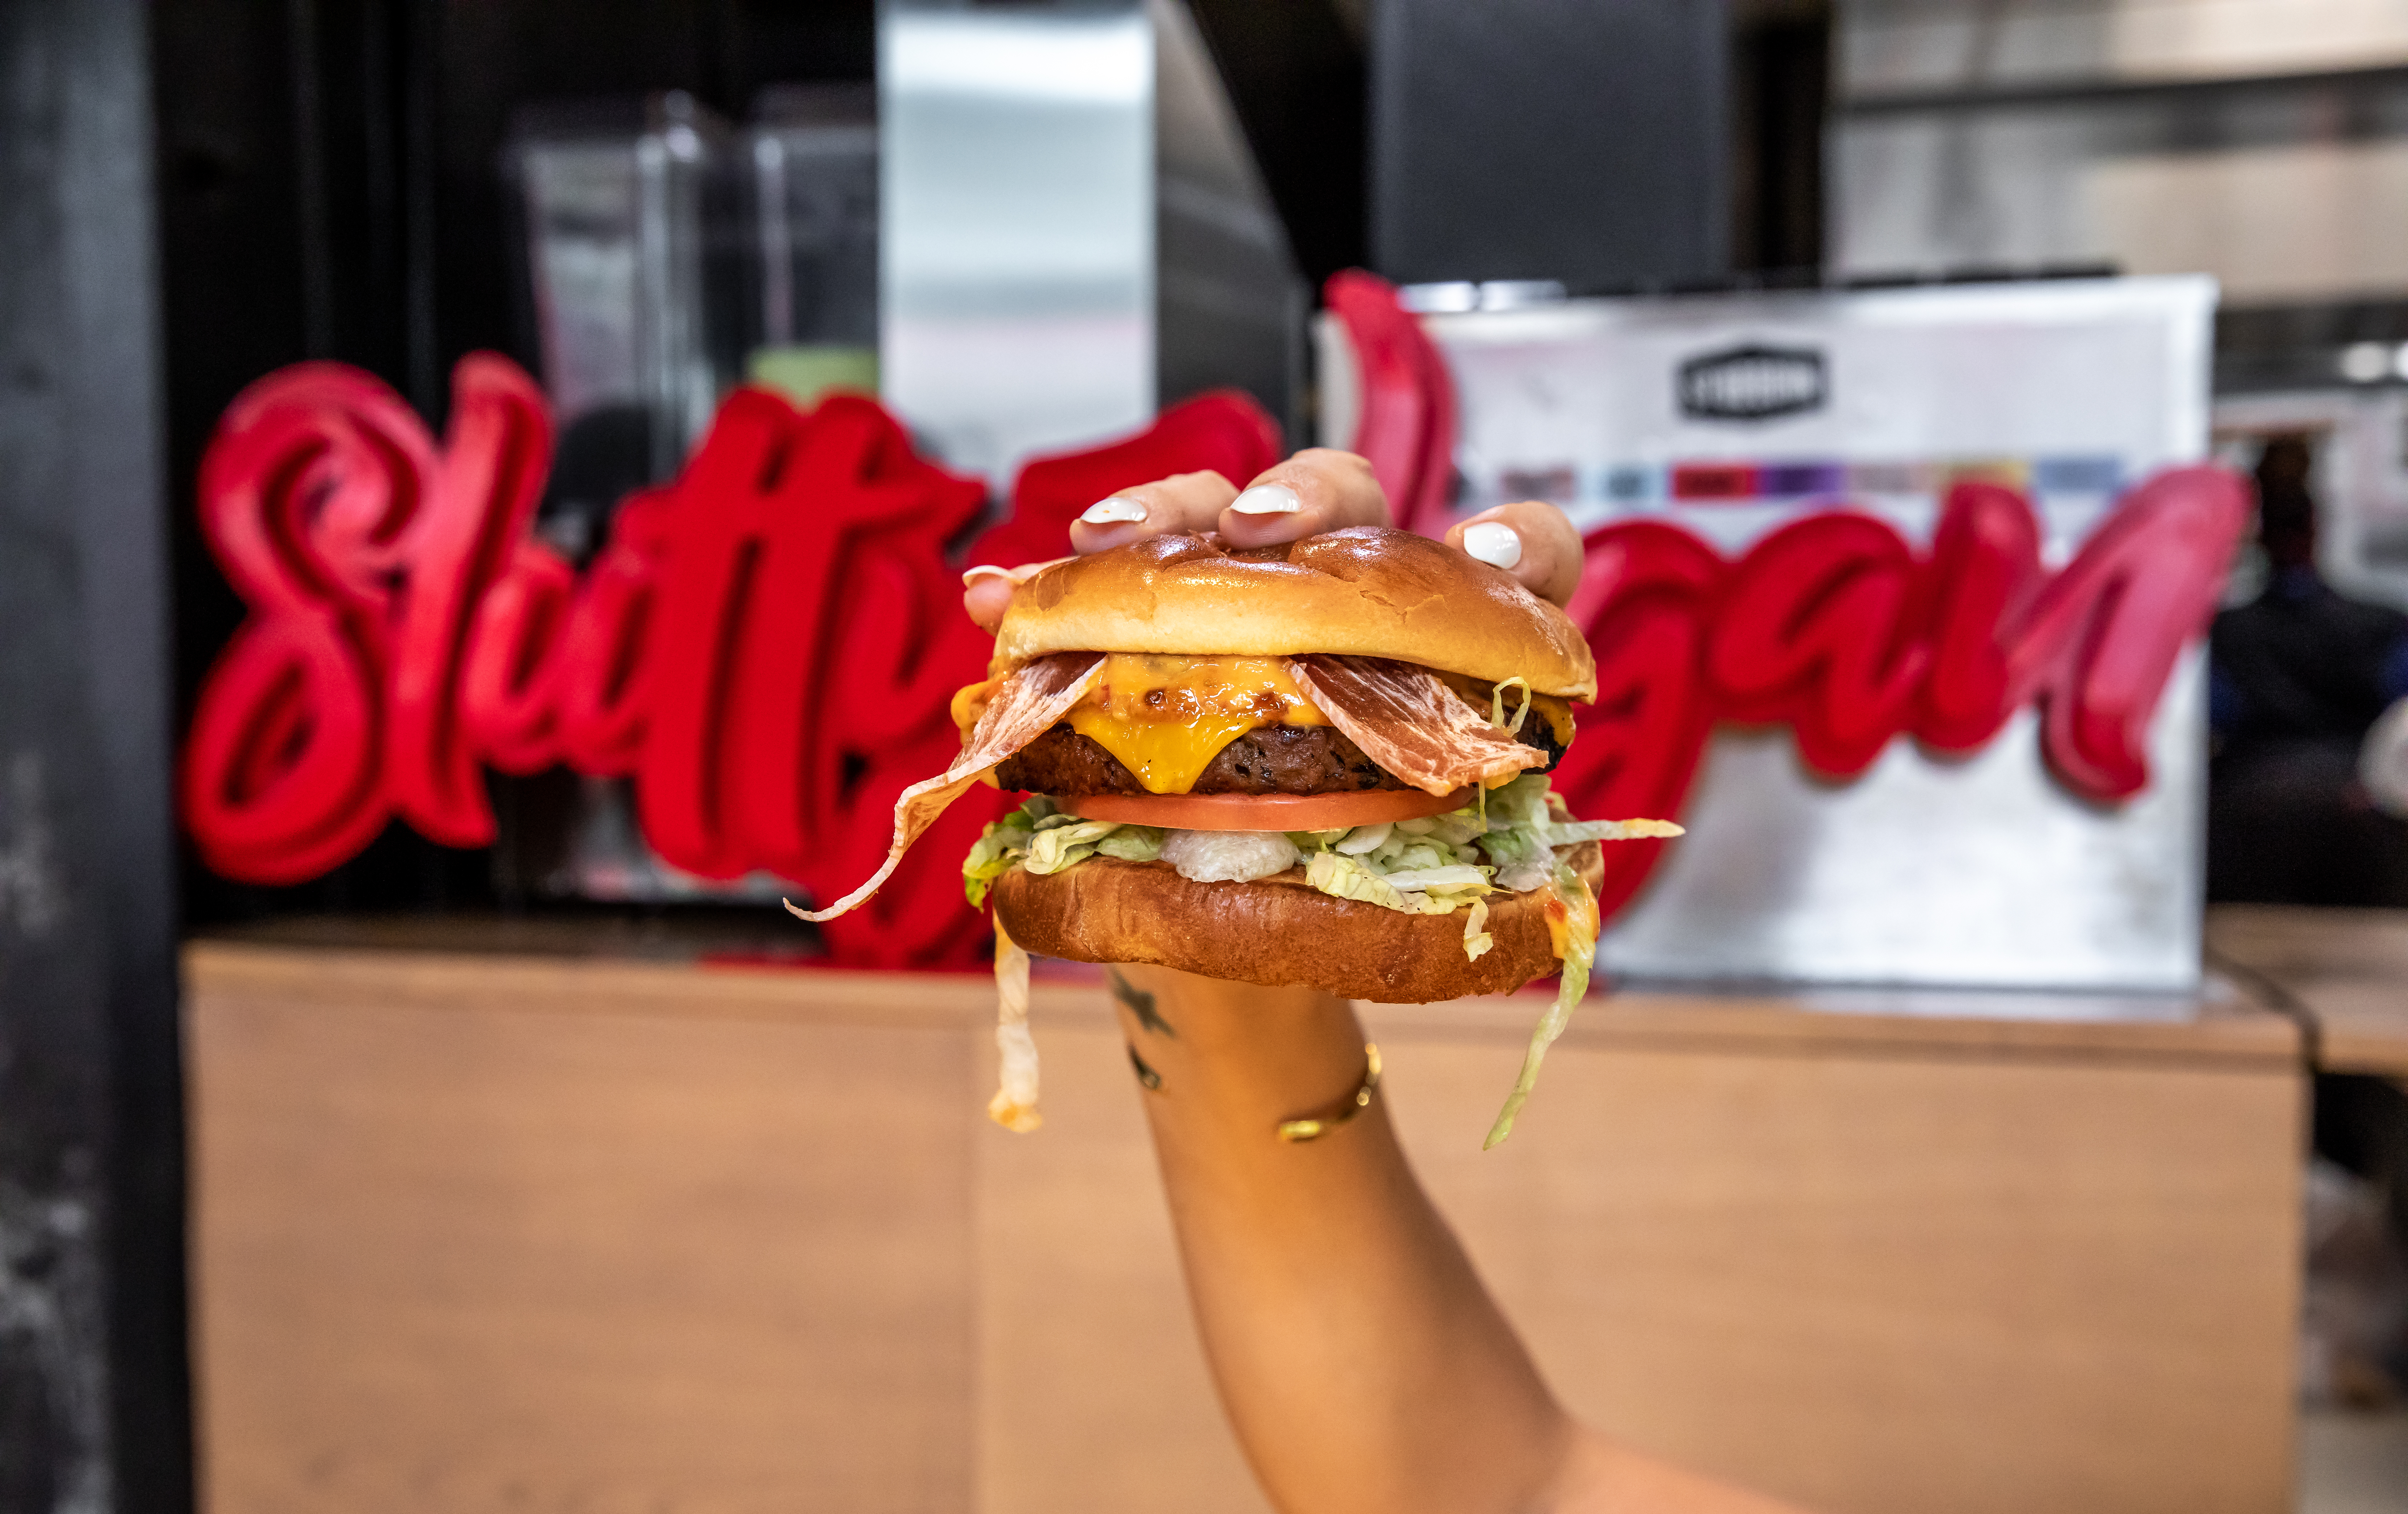 A woman’s hand holds up a vegan burger loaded with toppings, with the words “Slutty Vegan” behind it in red script.